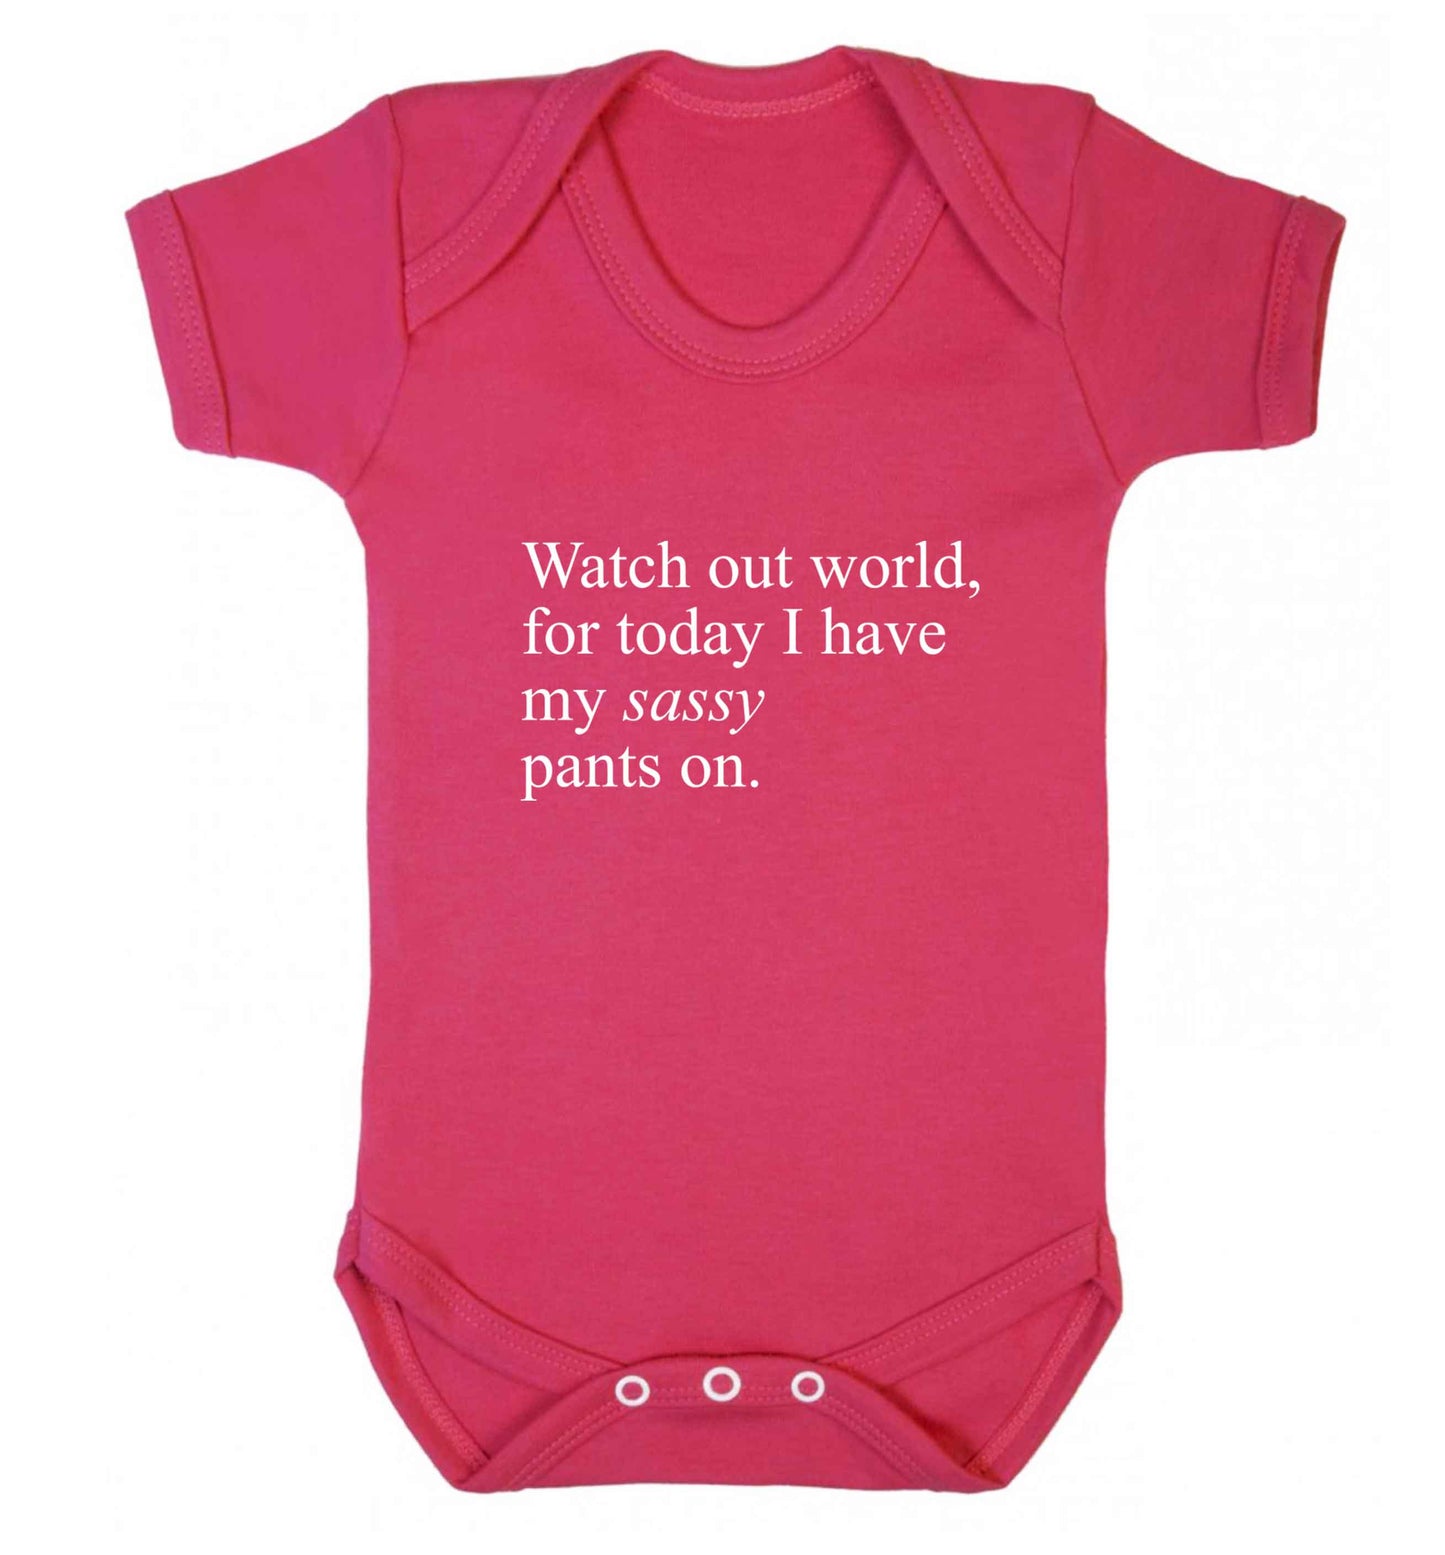 Watch out world for today I have my sassy pants on baby vest dark pink 18-24 months